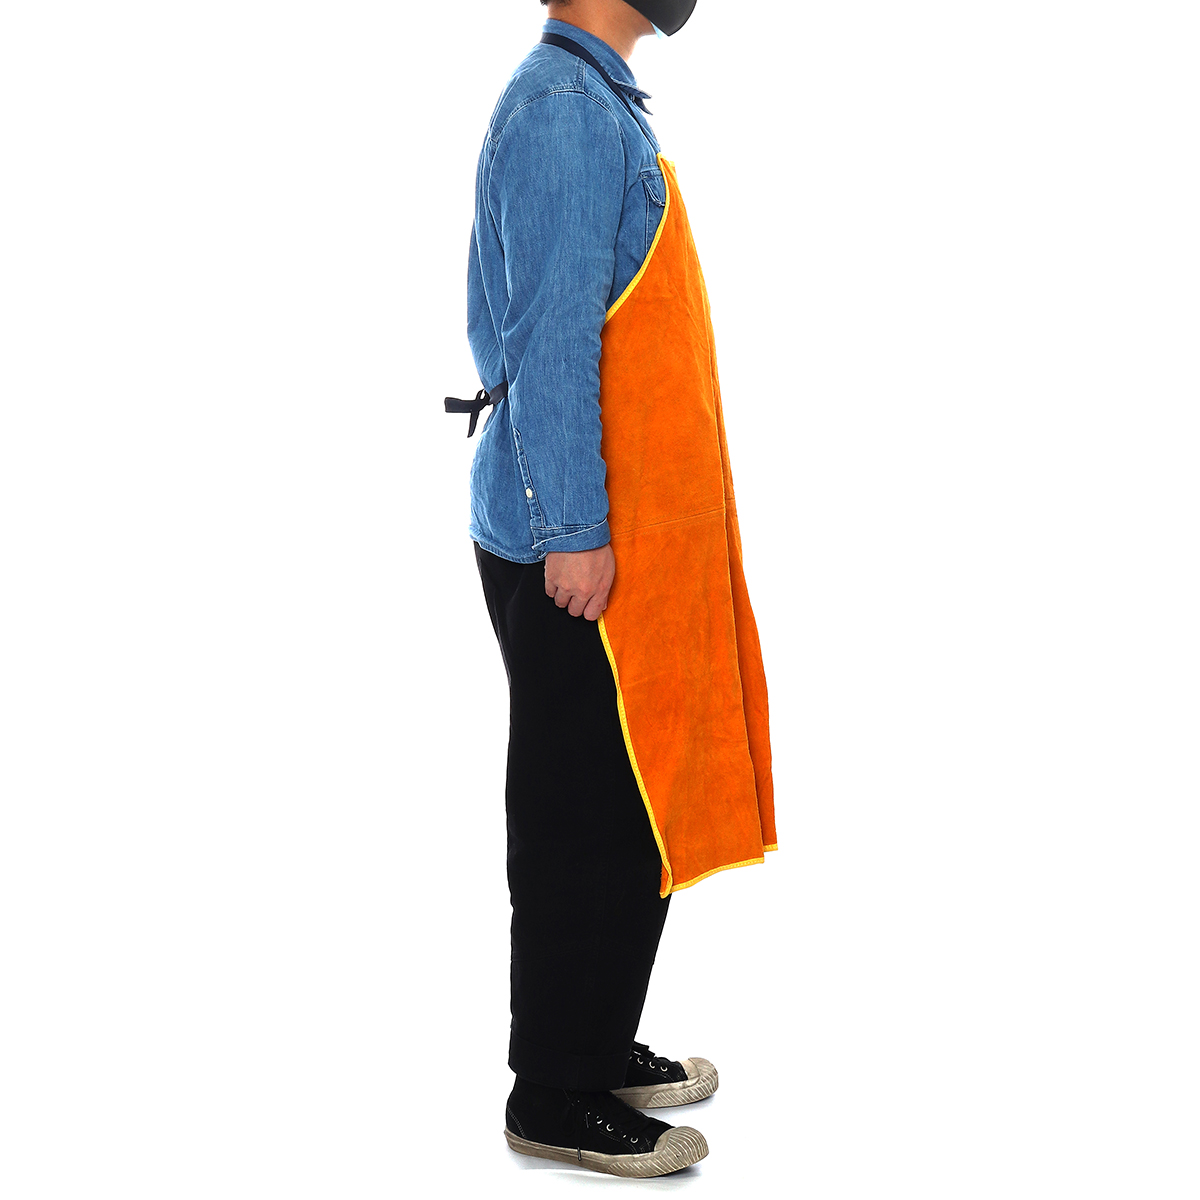 Cowhide-Leather-Welding-Apron-Welder-Protection-Clothe-Mechanic-Protector-Gear-1642713-9